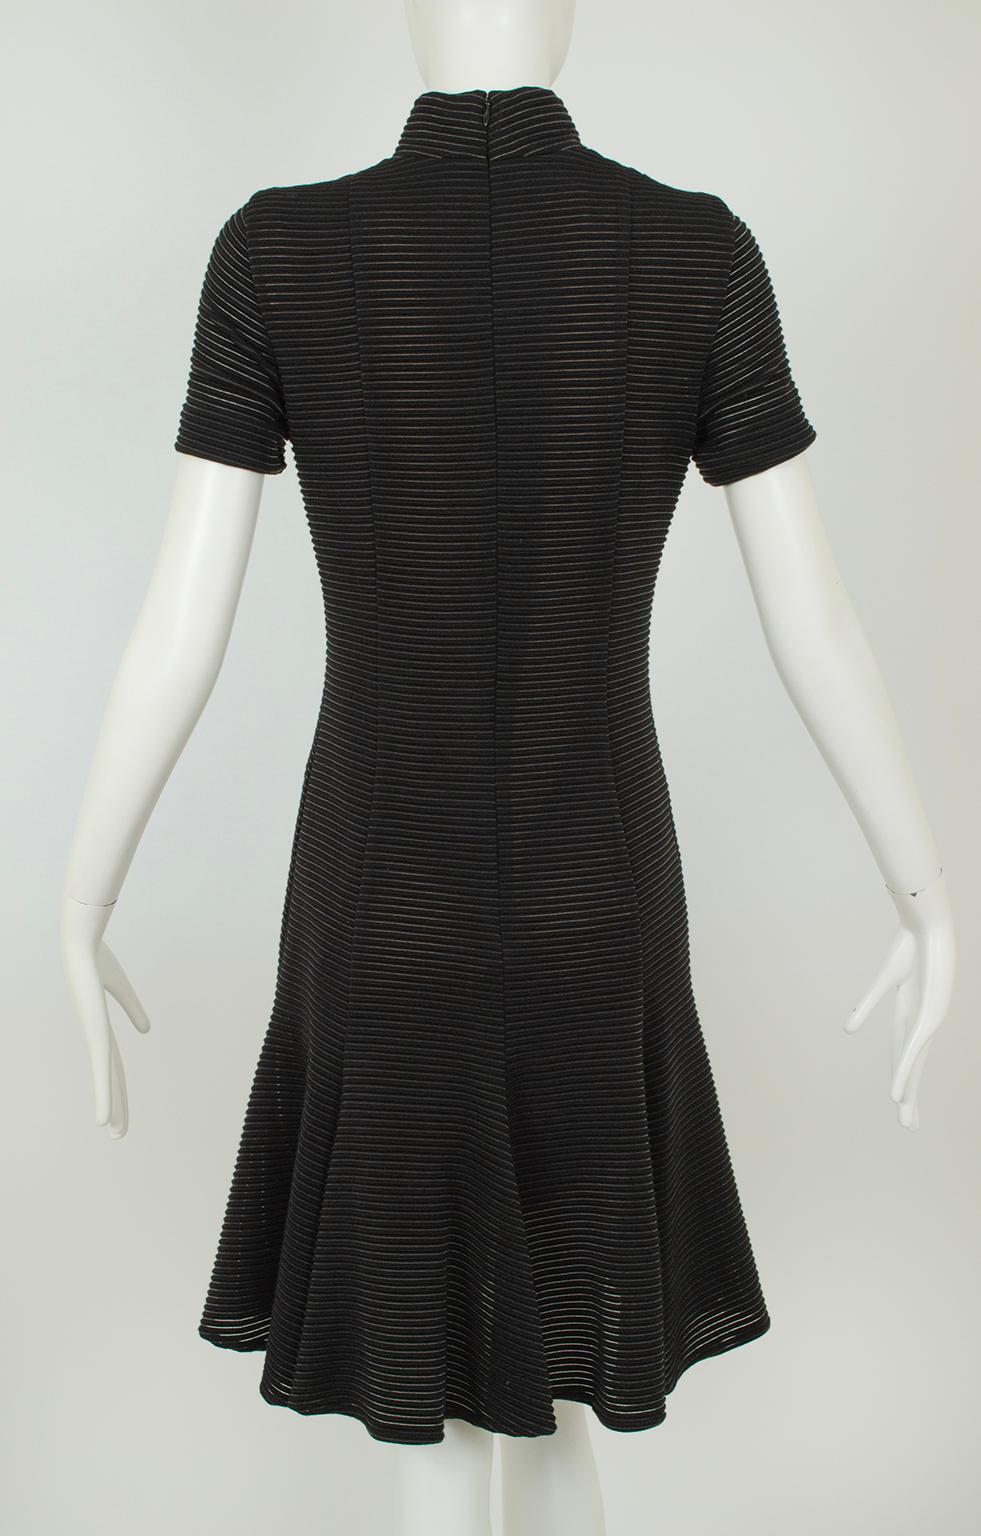 Black Akris Illusion Ribbed Fit and Flare Day Dress, Original Tags – S, 2012 For Sale 2